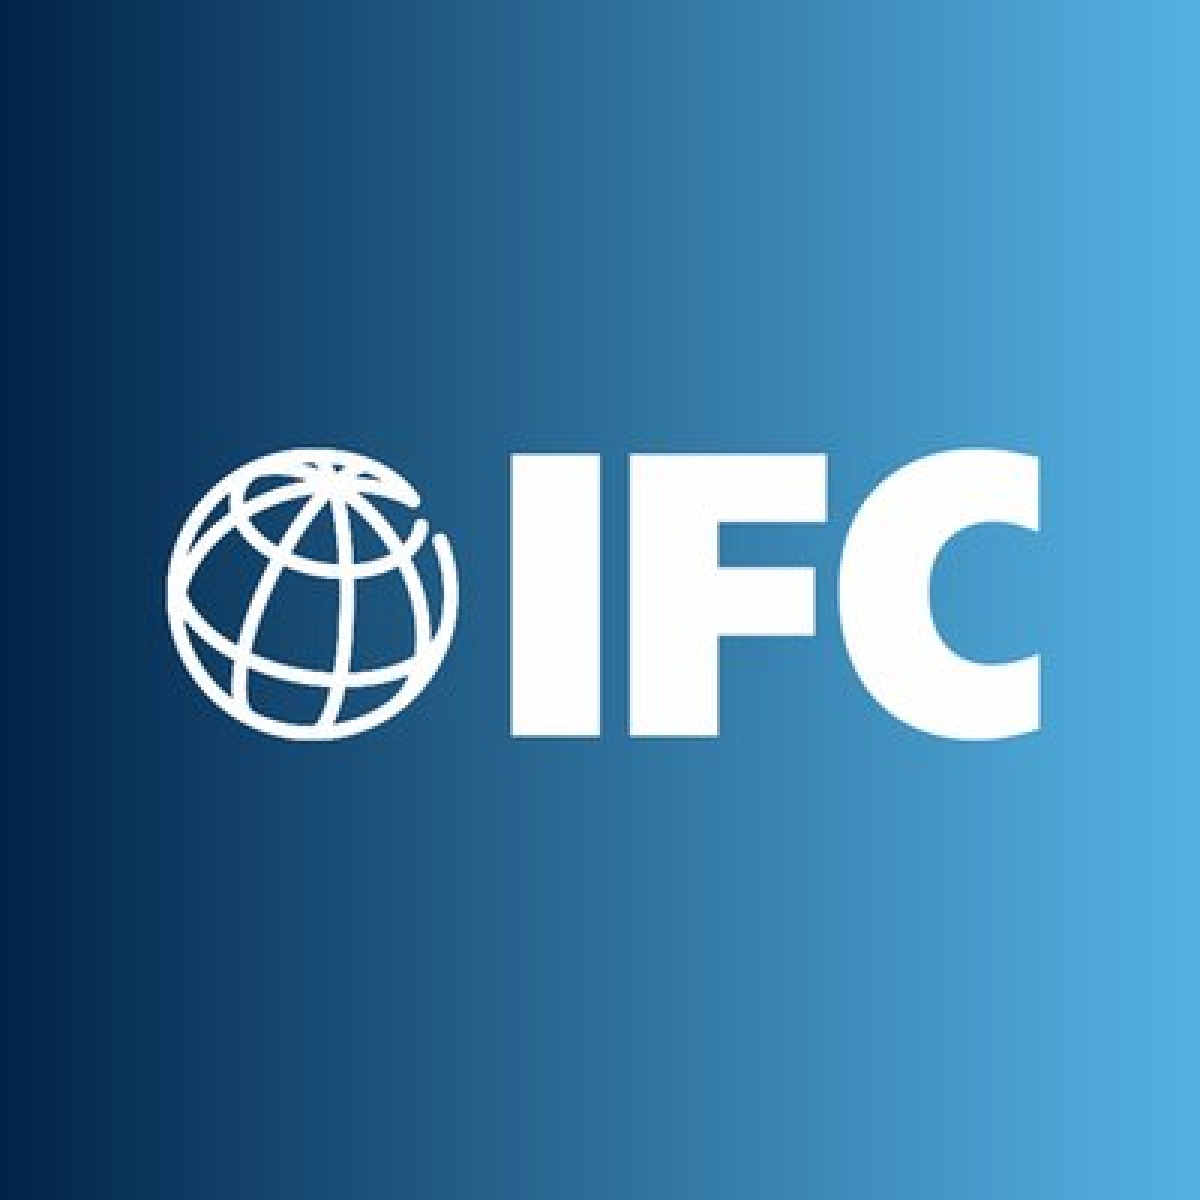 IFC Stresses Private Sector Engagement as Key to Sri Lanka's Economic Growth